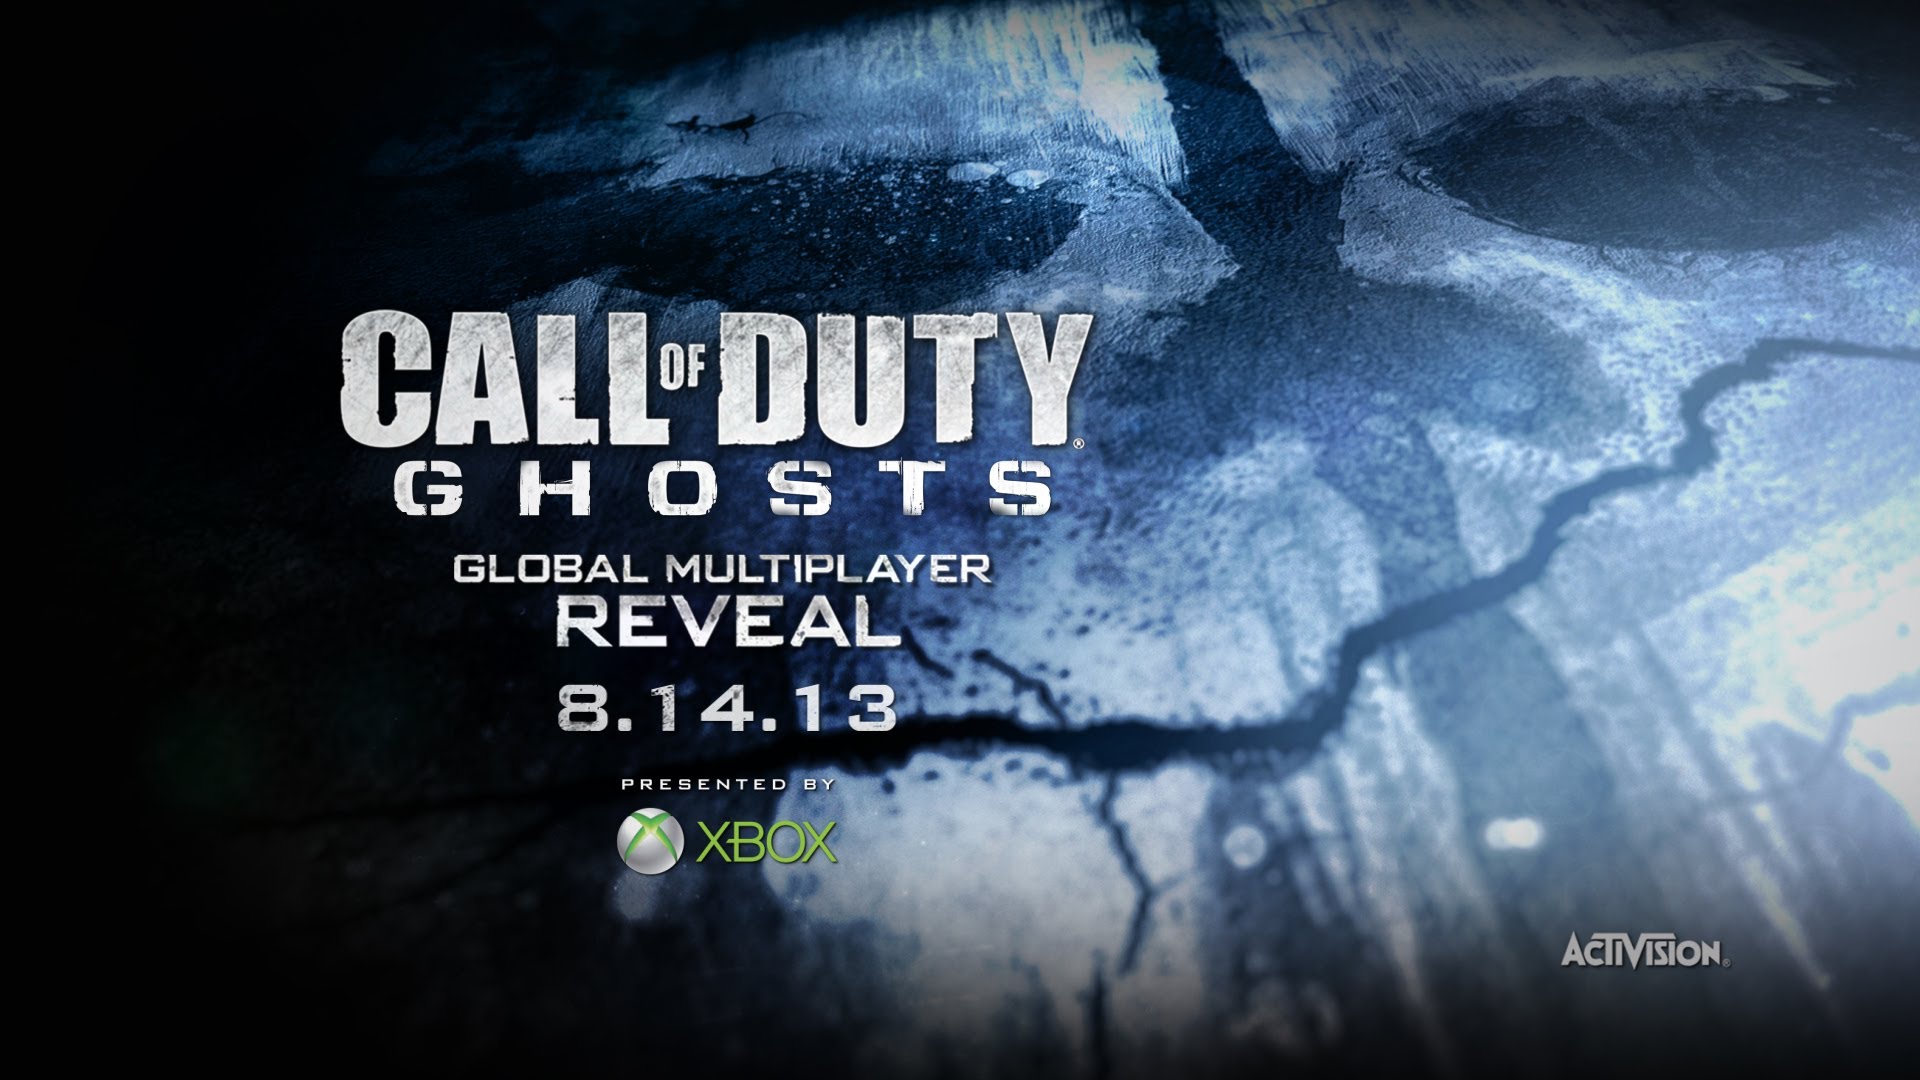 Video For Call of Duty: Ghosts Global Multiplayer Reveal – Aug. 14